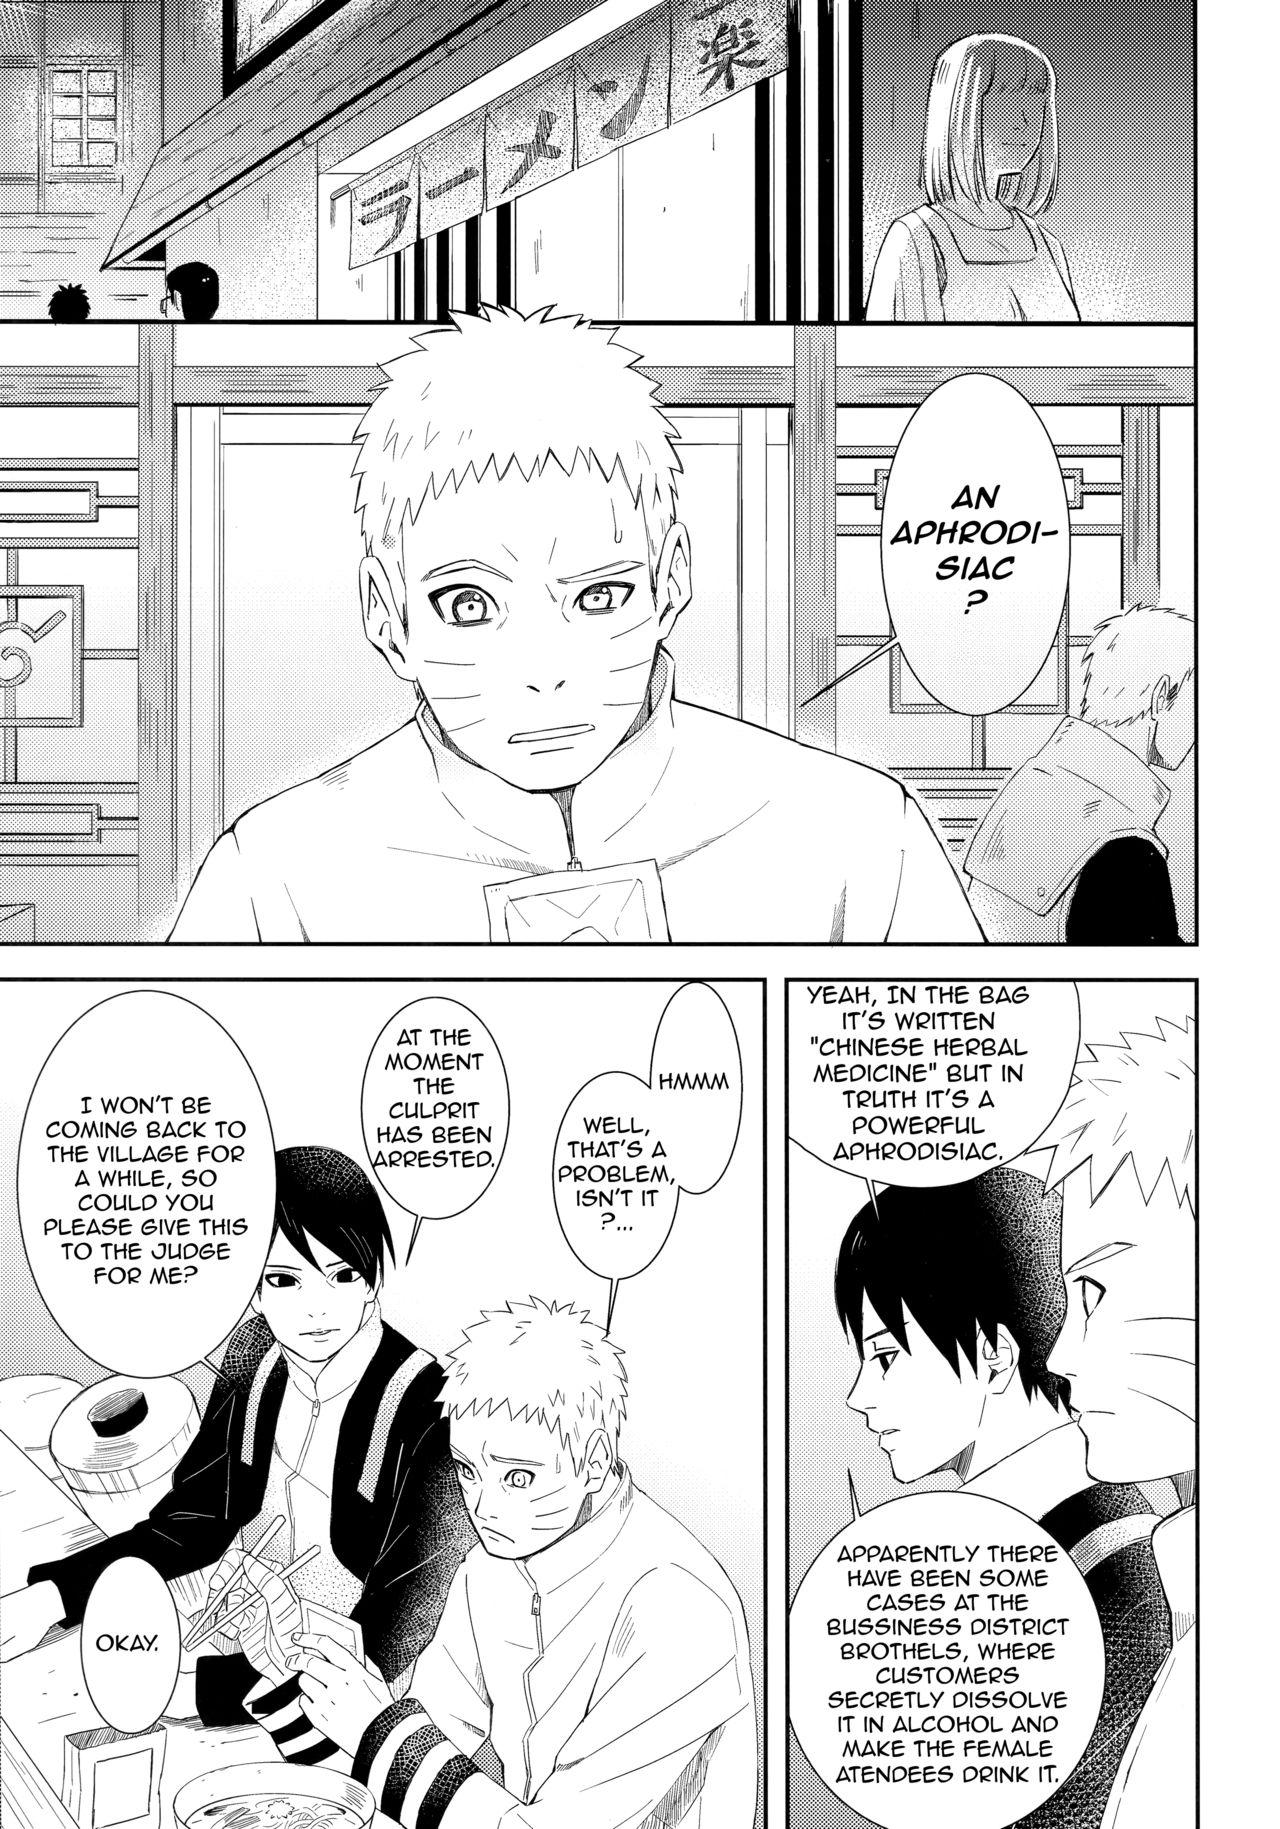 Gay Dudes Taihen'na koto ni natchimatte! | This became a troublesome situation! - Naruto Boruto Hot Whores - Page 2